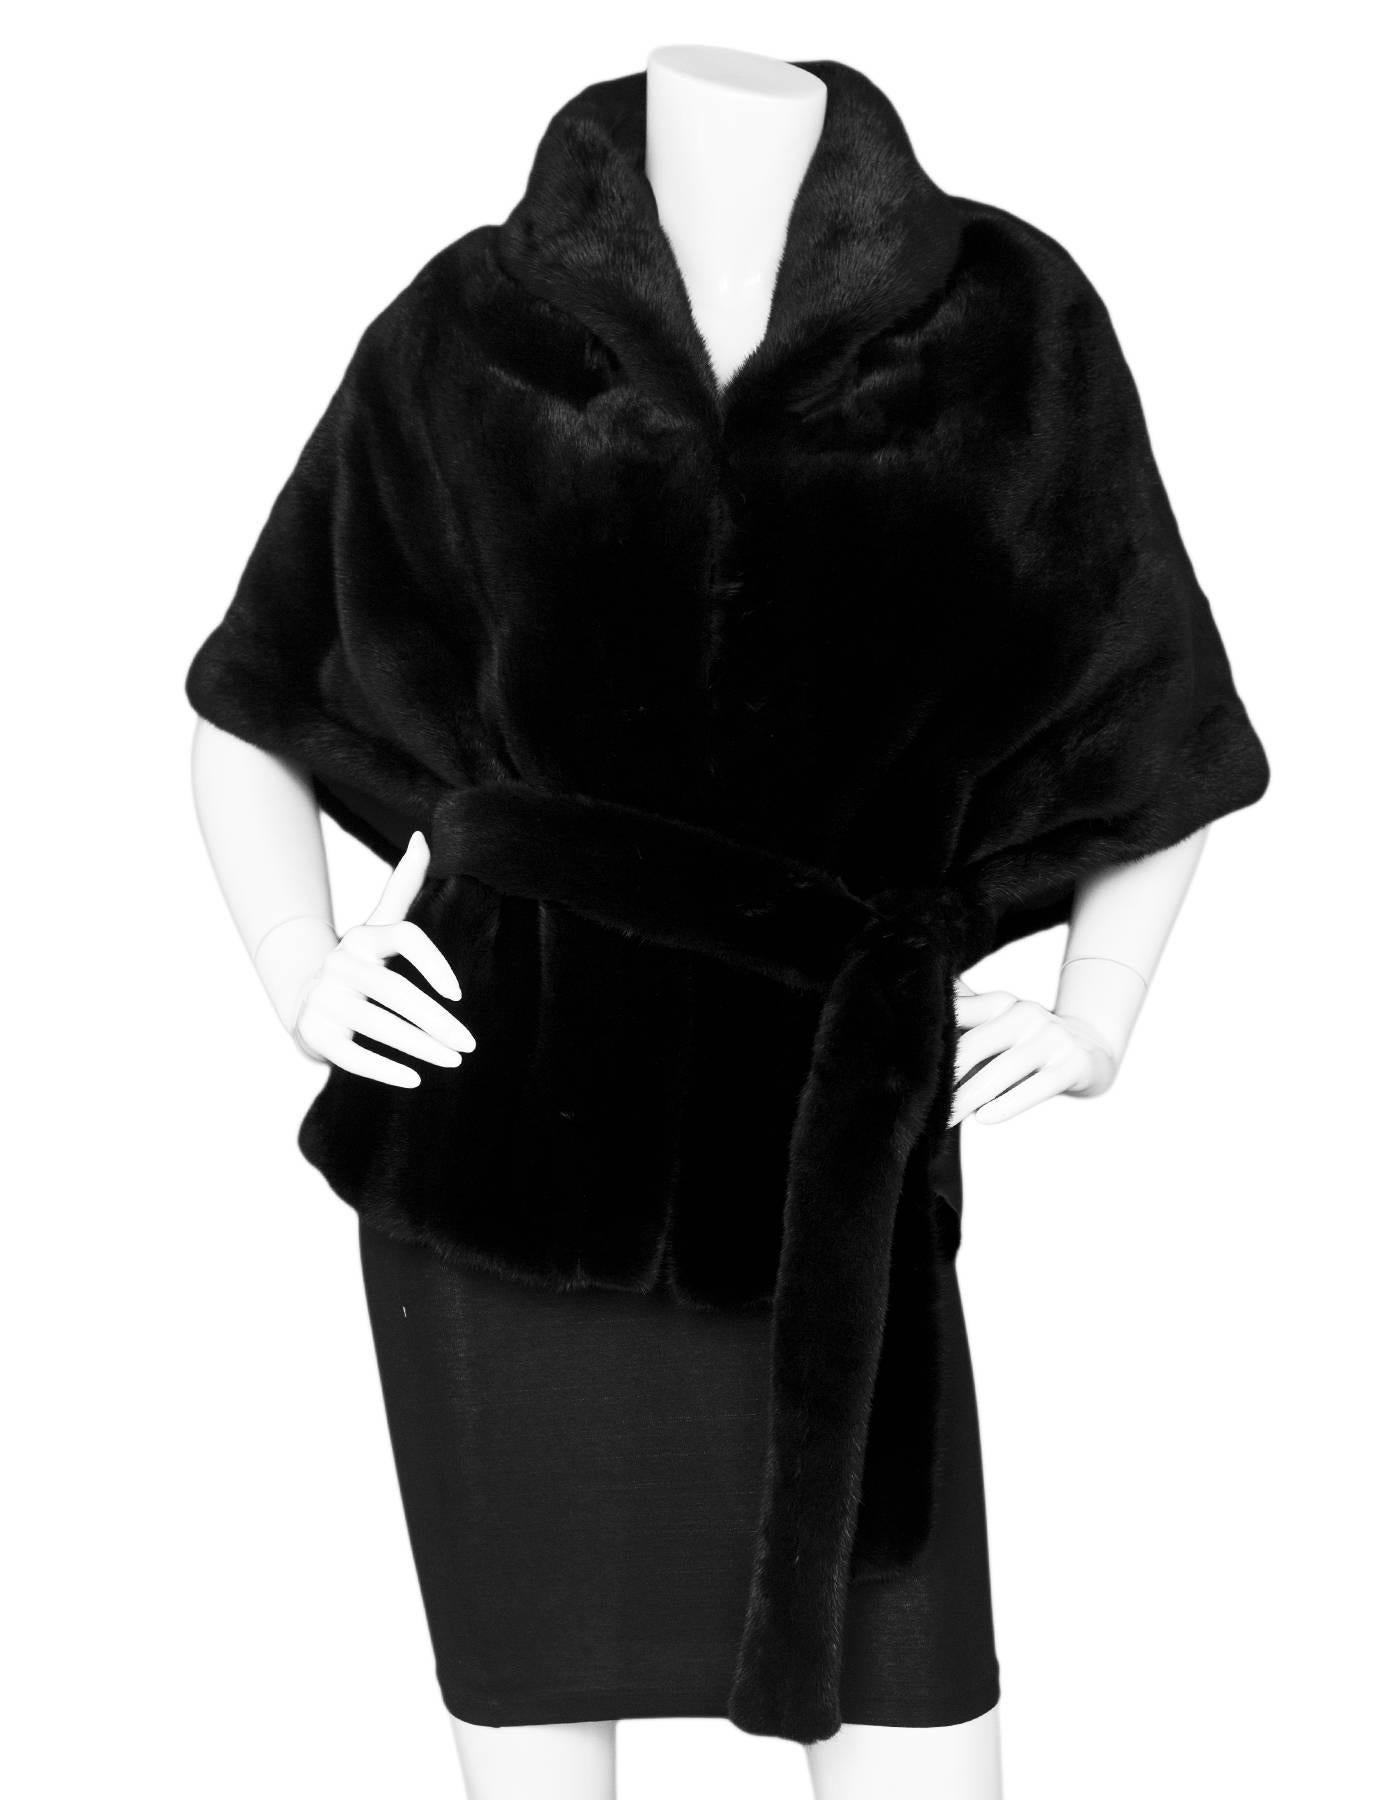 Sagafur Black Mink Cape with Belt

Features draped lapels

Color: Black
Composition: Believed to be mink fur
Lining: Black textile
Closure/Opening: Front hook and eye closure
Retail Price: $2,600 + tax
Overall Condition: Excellent pre-owned